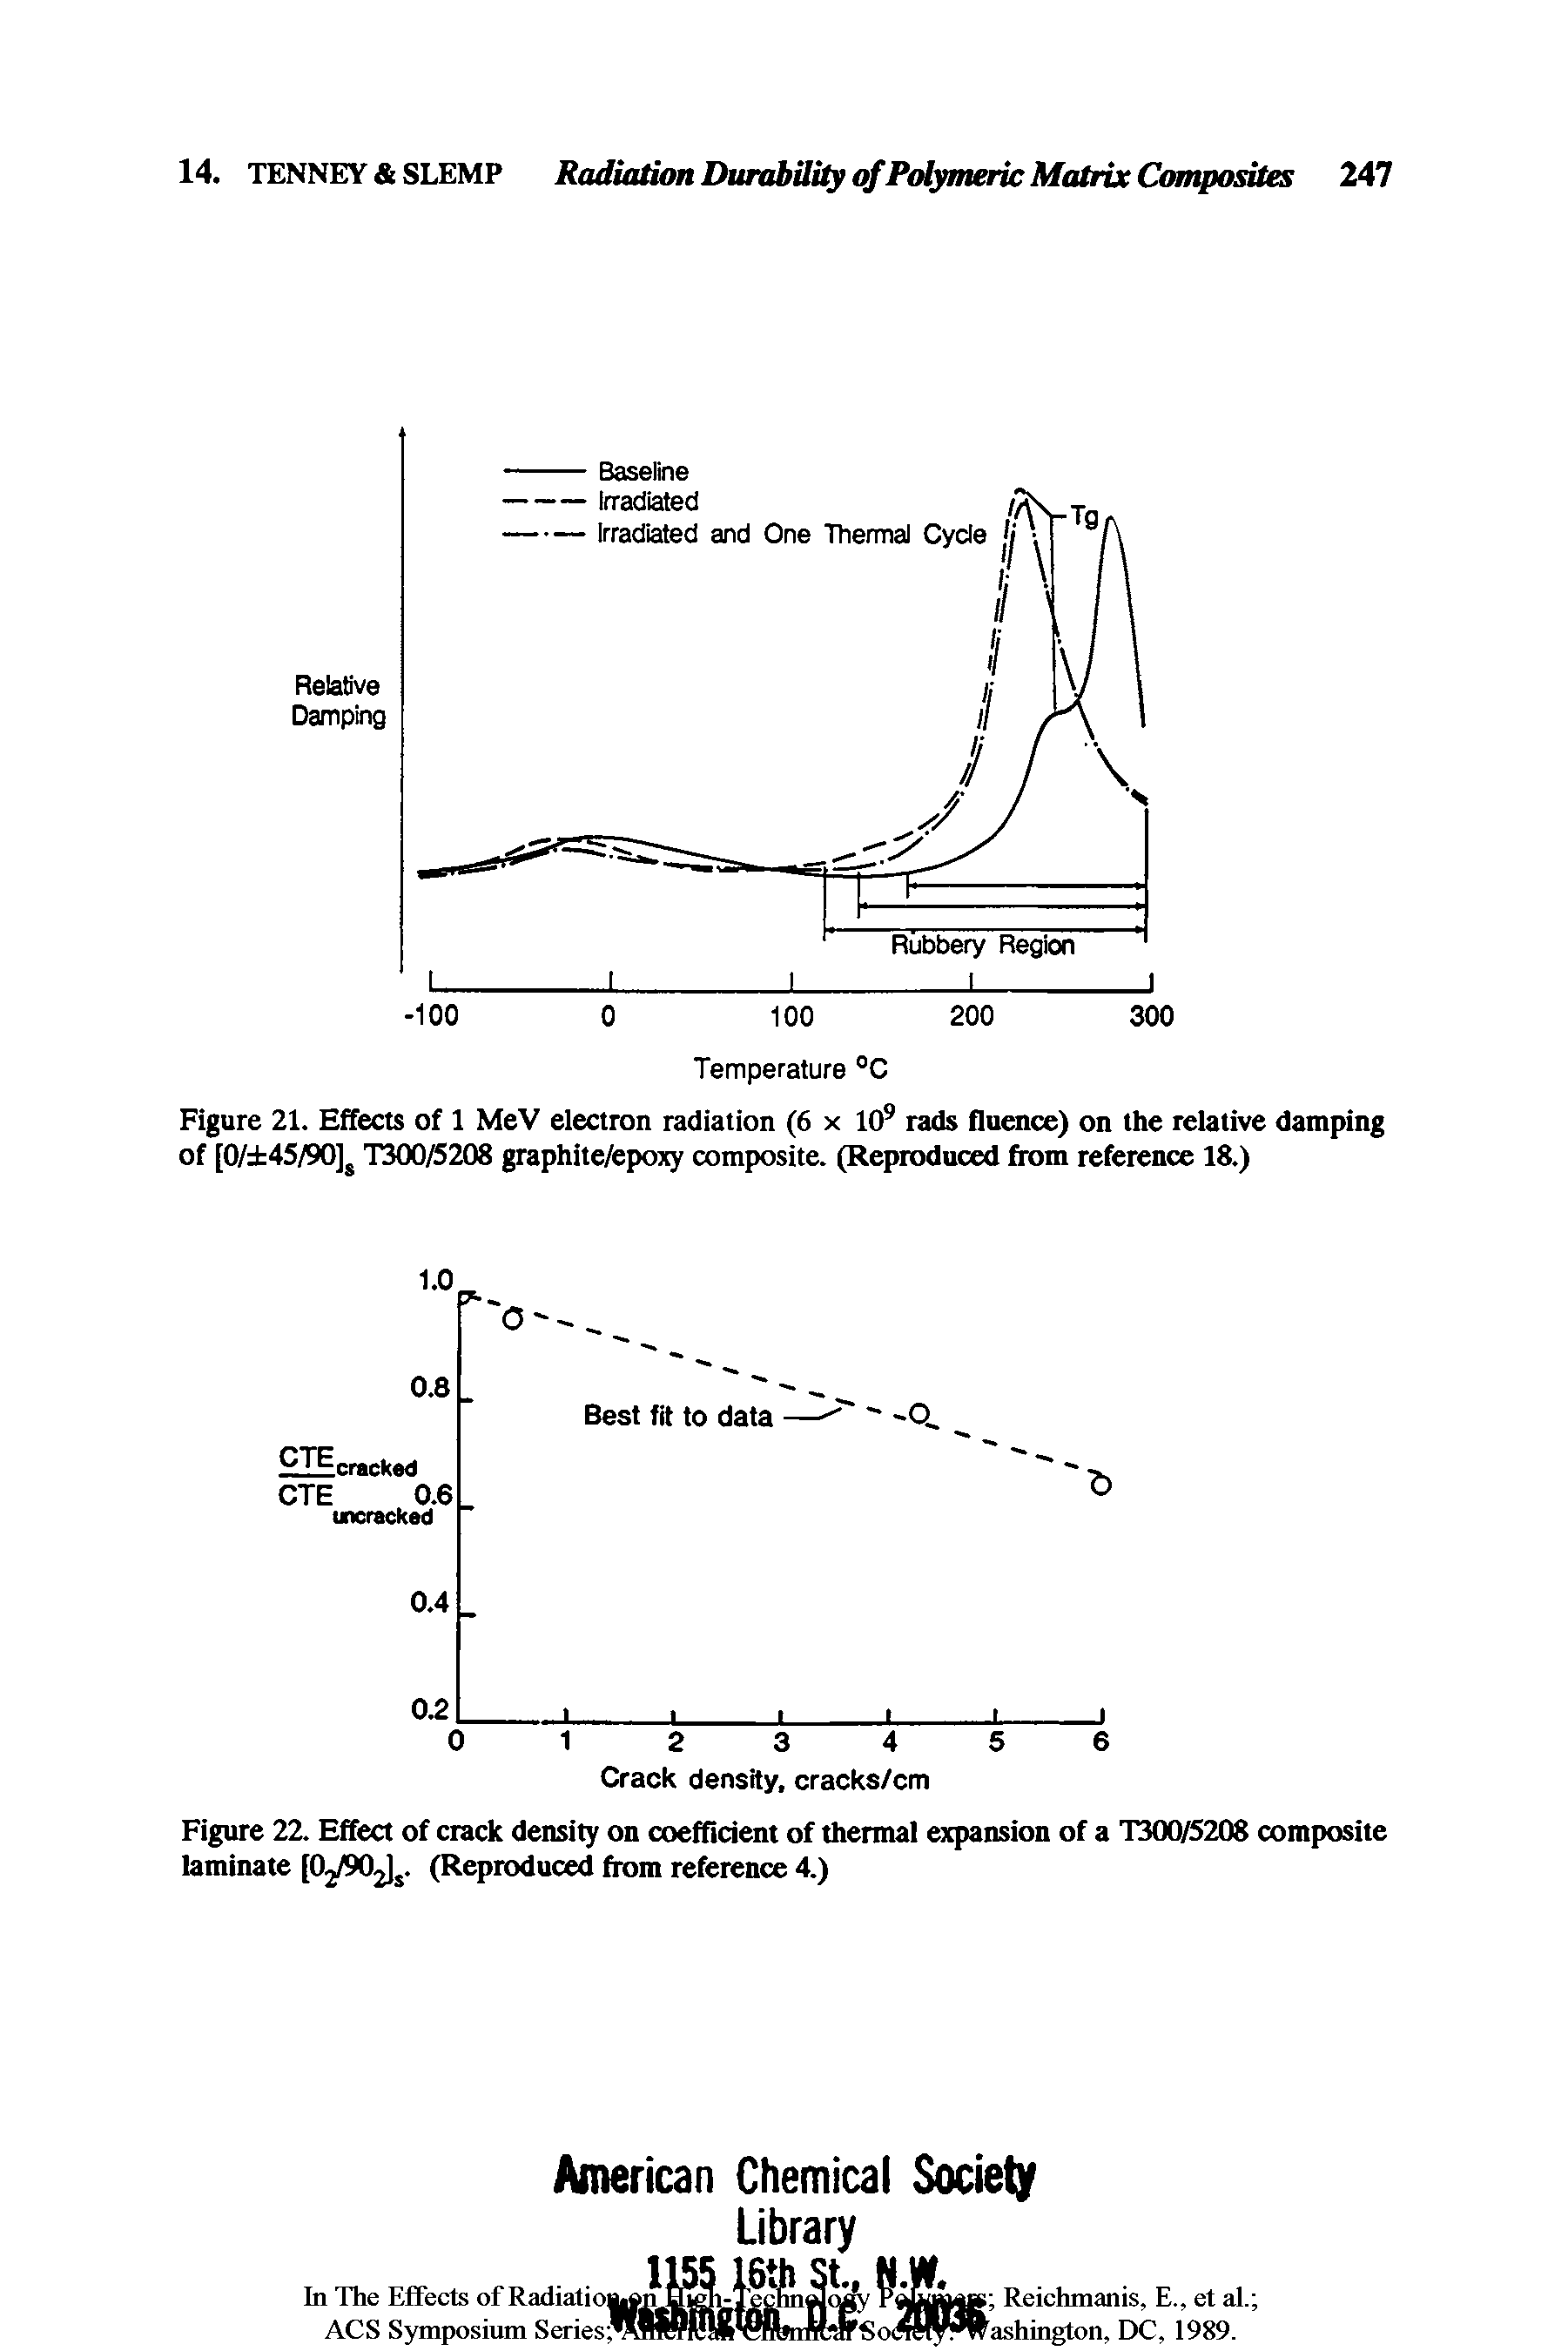 Figure 21. Effects of 1 MeV electron radiation (6 x 109 rads fluence) on the relative damping of [0/ 45/90]s T300/5208 graphite/epoxy composite. (Reproduced from reference 18.)...